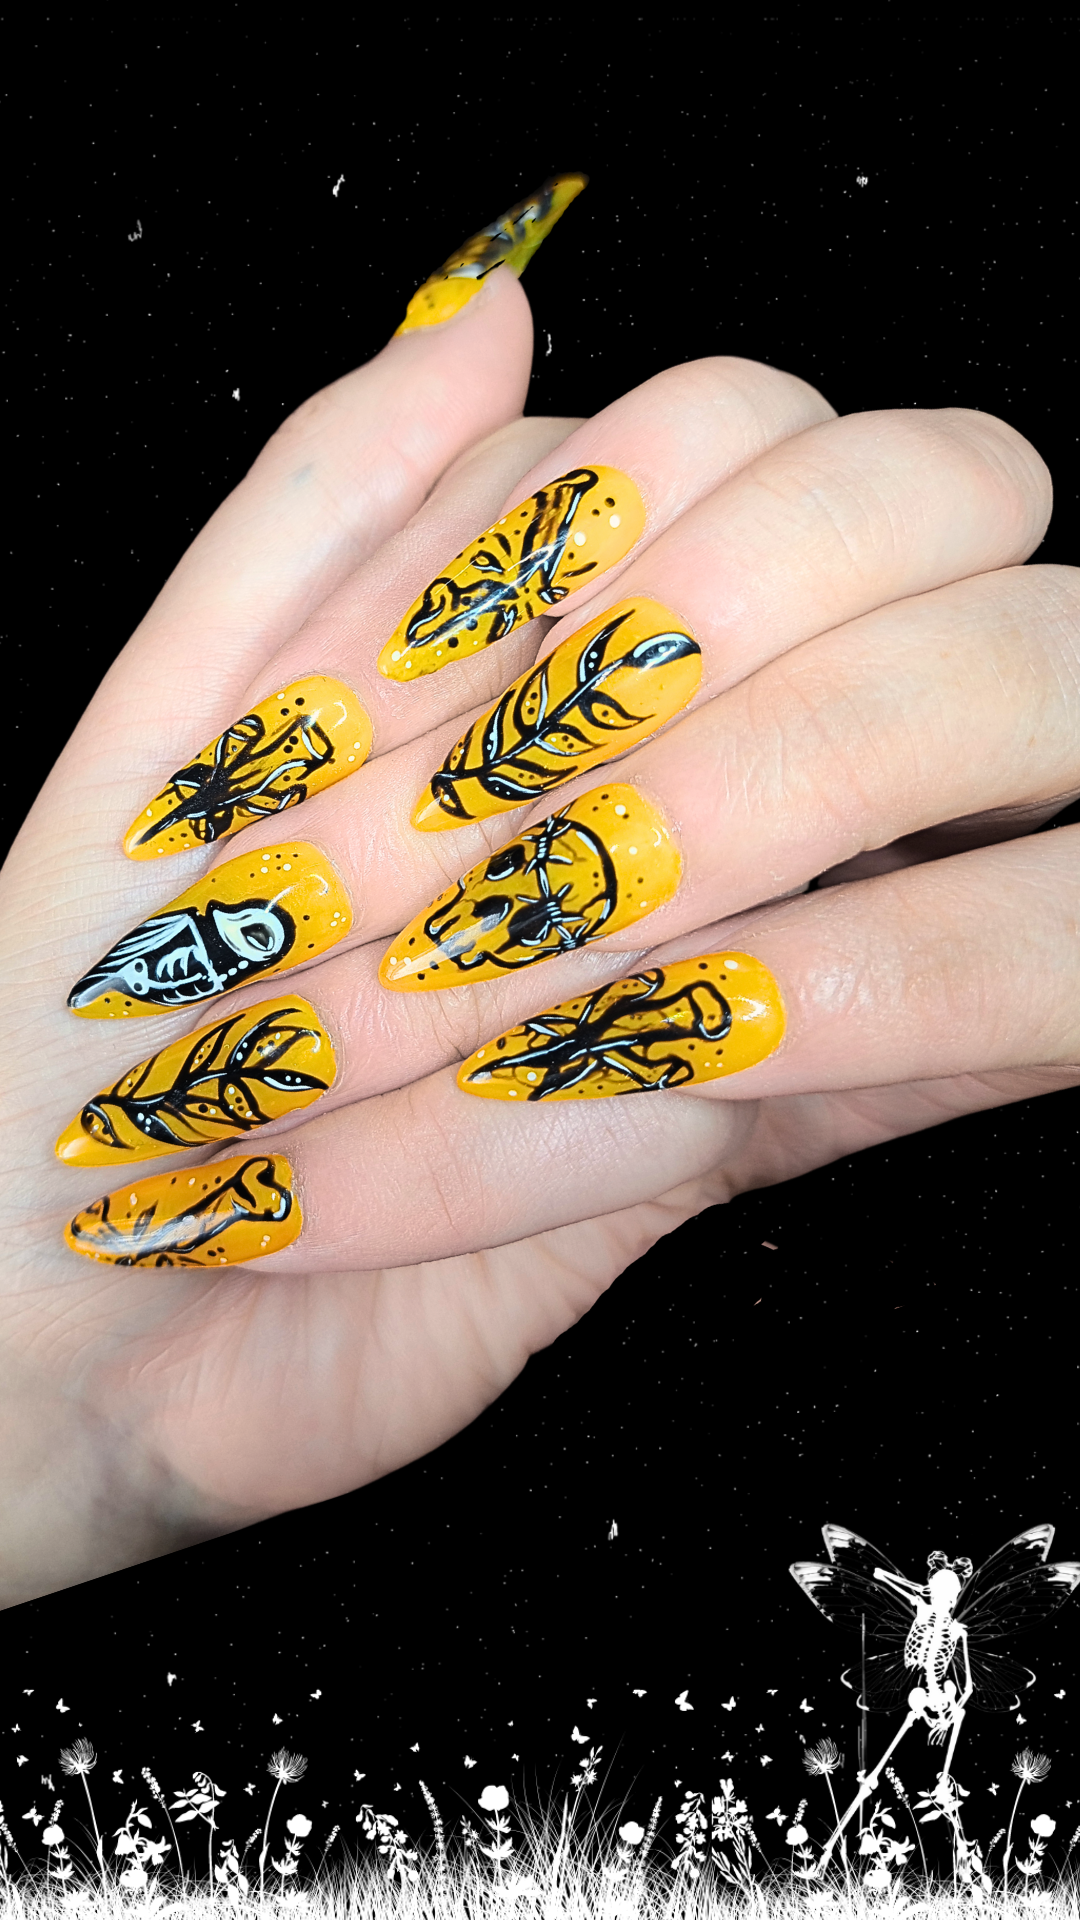 yellow press on nails with blackwork tattoo style nail art design 